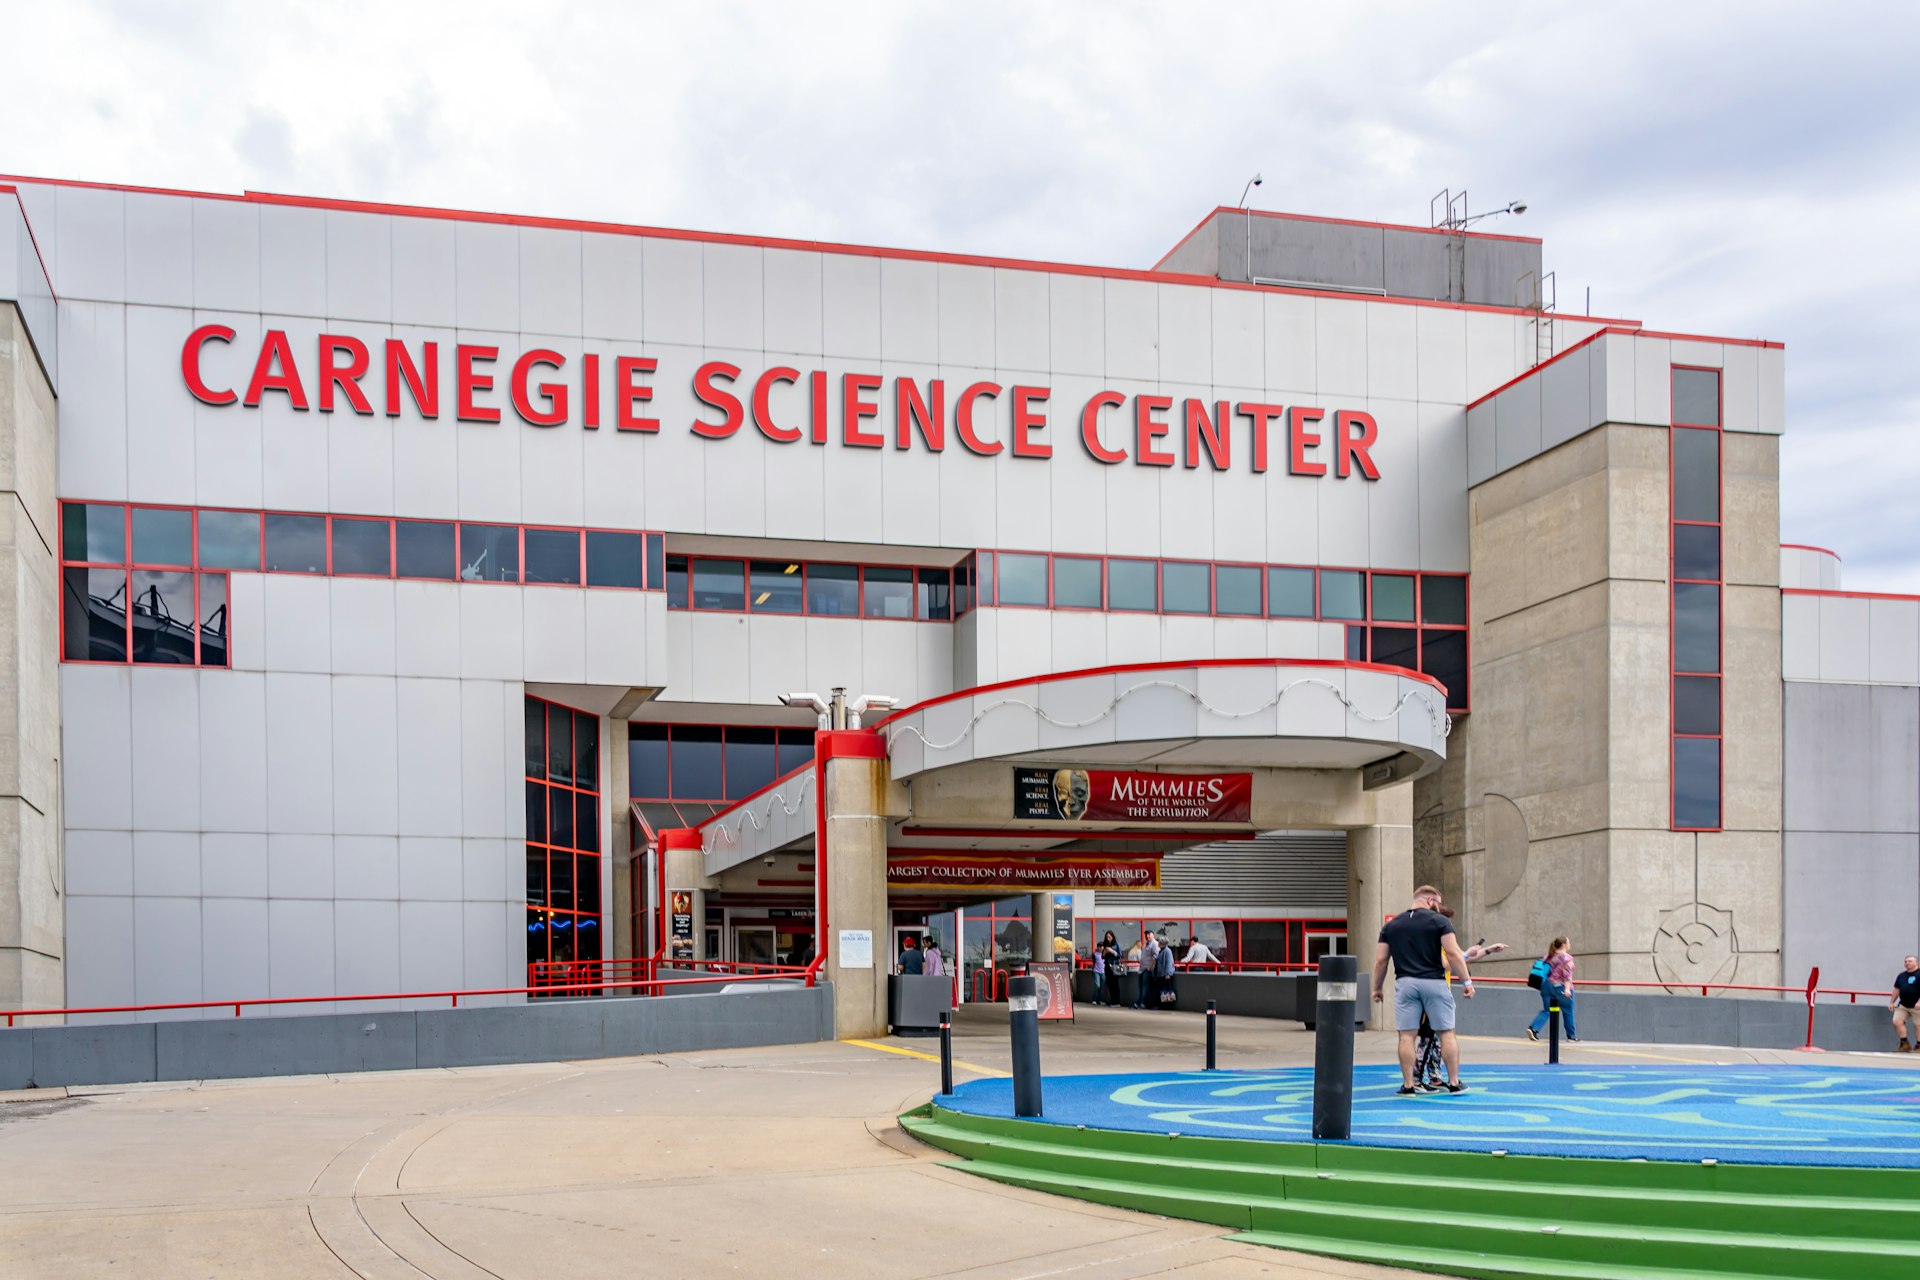 Entrance of Carnegie Science Center in Pittsburgh, Pennsylvania There are a few people standing outside of the red and gray building